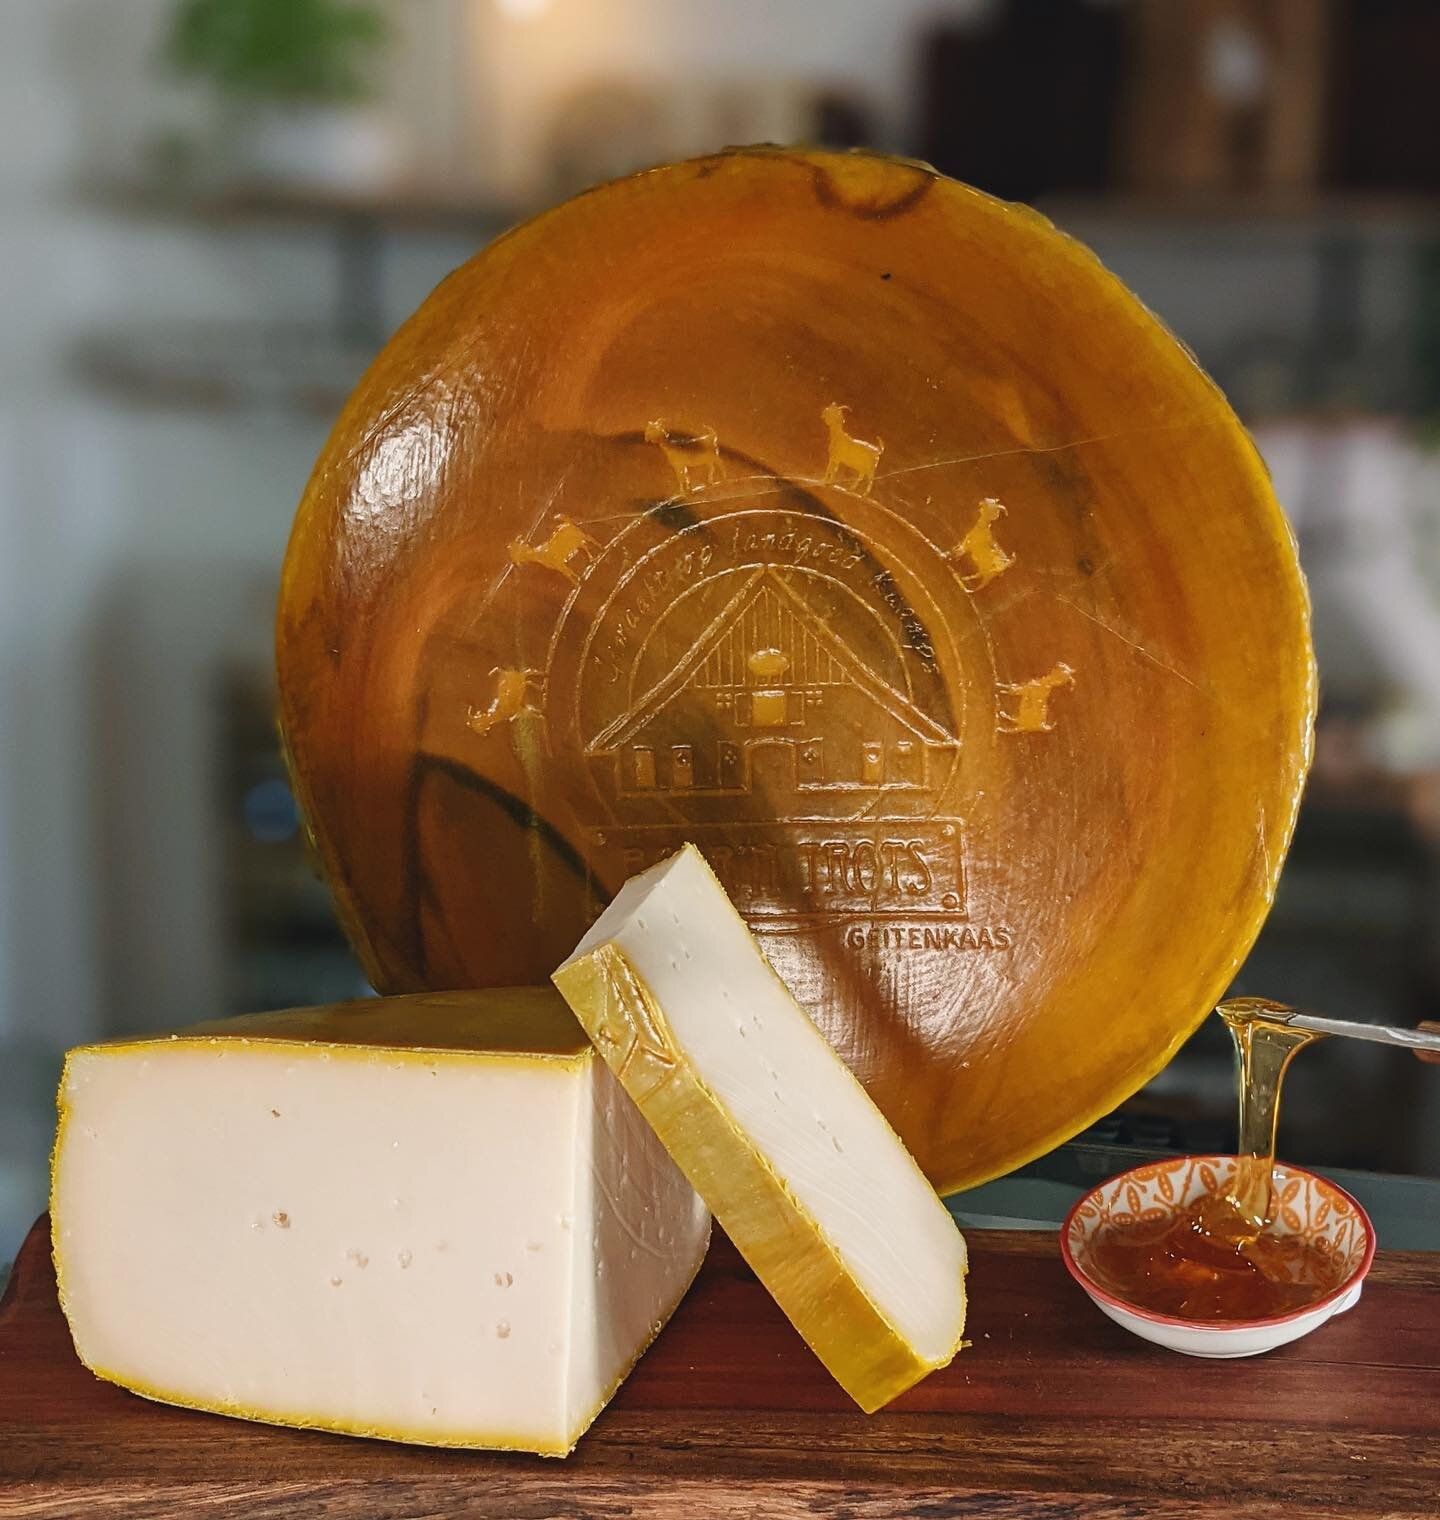 Honey and cheese are known for being a perfect pair. Add goats&rsquo; cheese to the equation and you&rsquo;ve got a match made in heaven 🍯🧀🐐

This melt-in-your-mouth goat gouda is smooth and creamy on the palette and leaves you with sweet underton